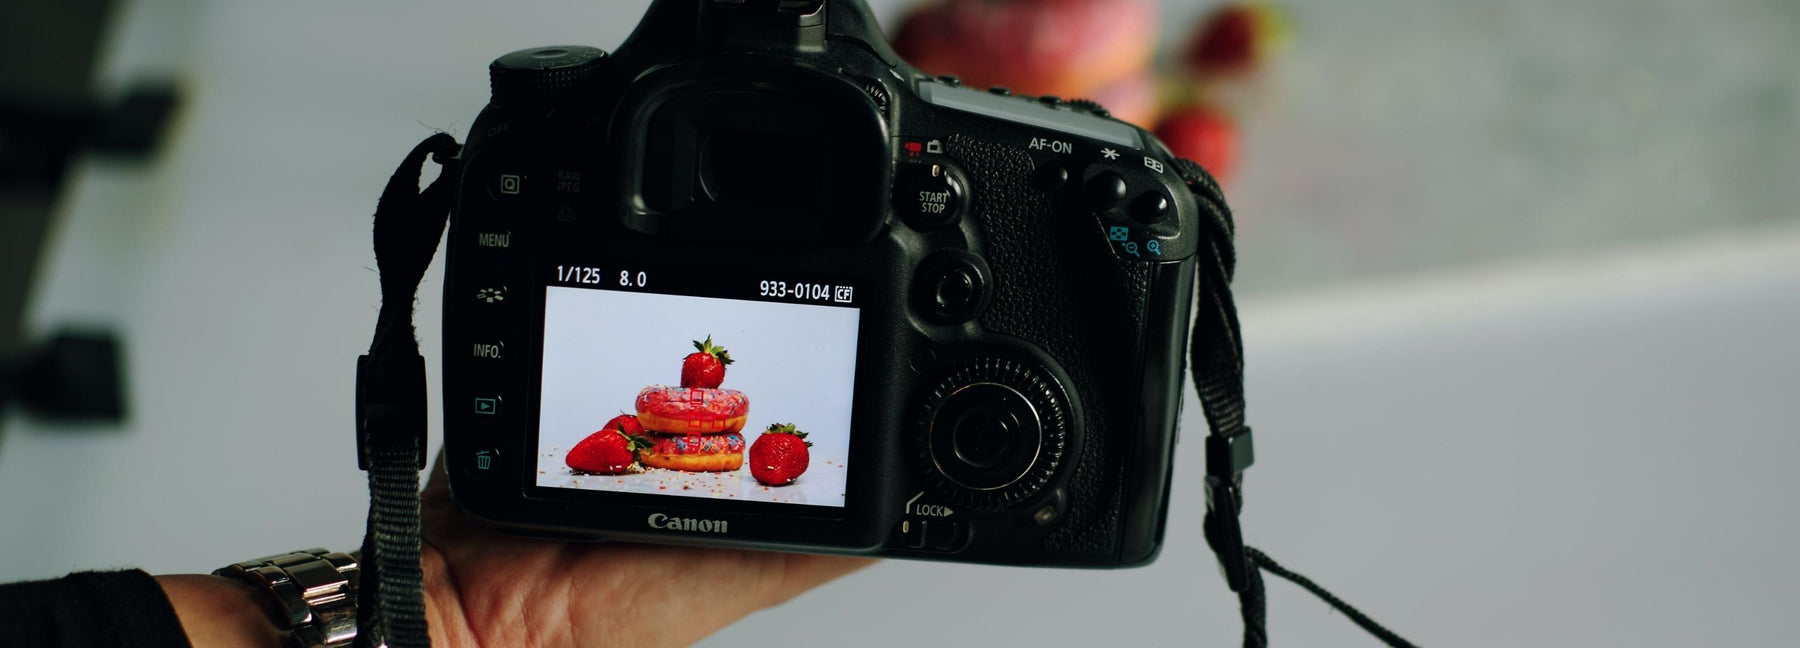 The 5 Most Common Product Photography Mistakes